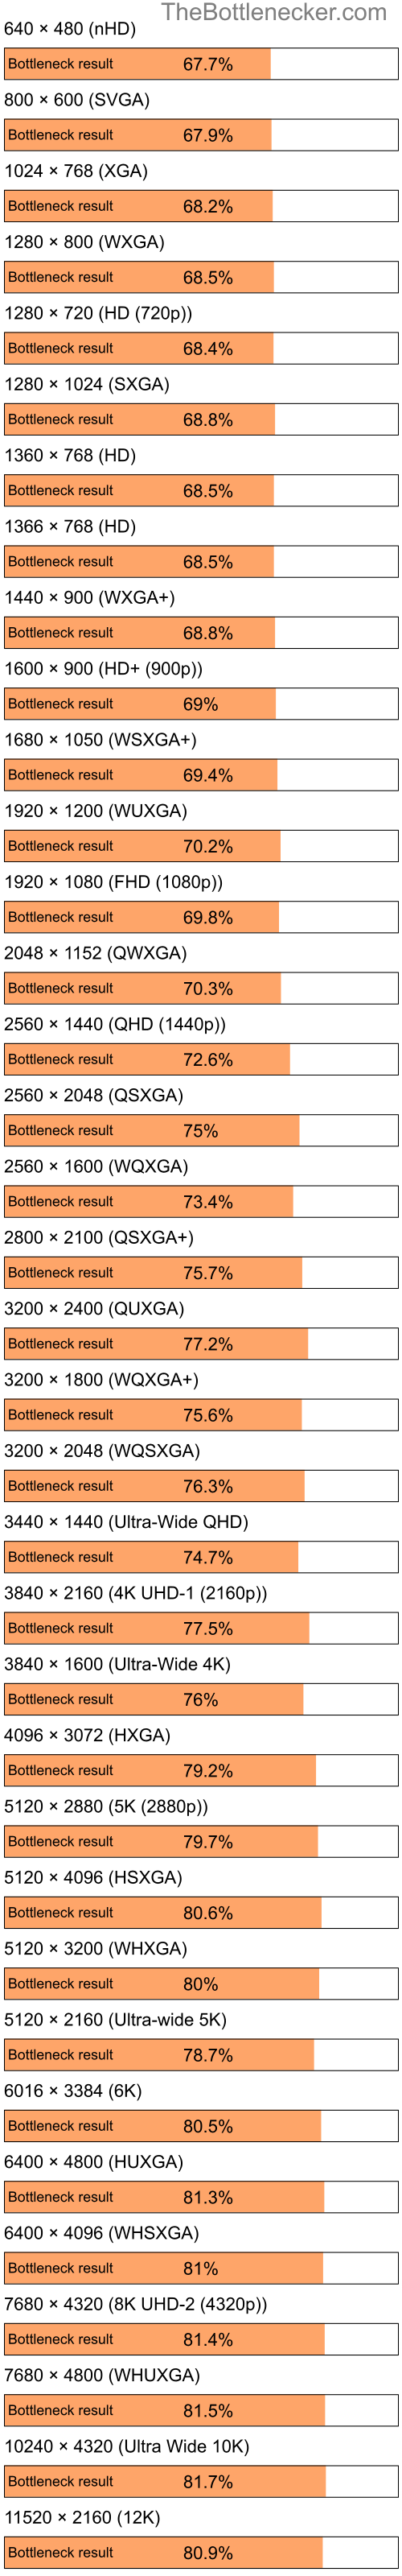 Bottleneck results by resolution for Intel Celeron and AMD Radeon X800 XL in General Tasks